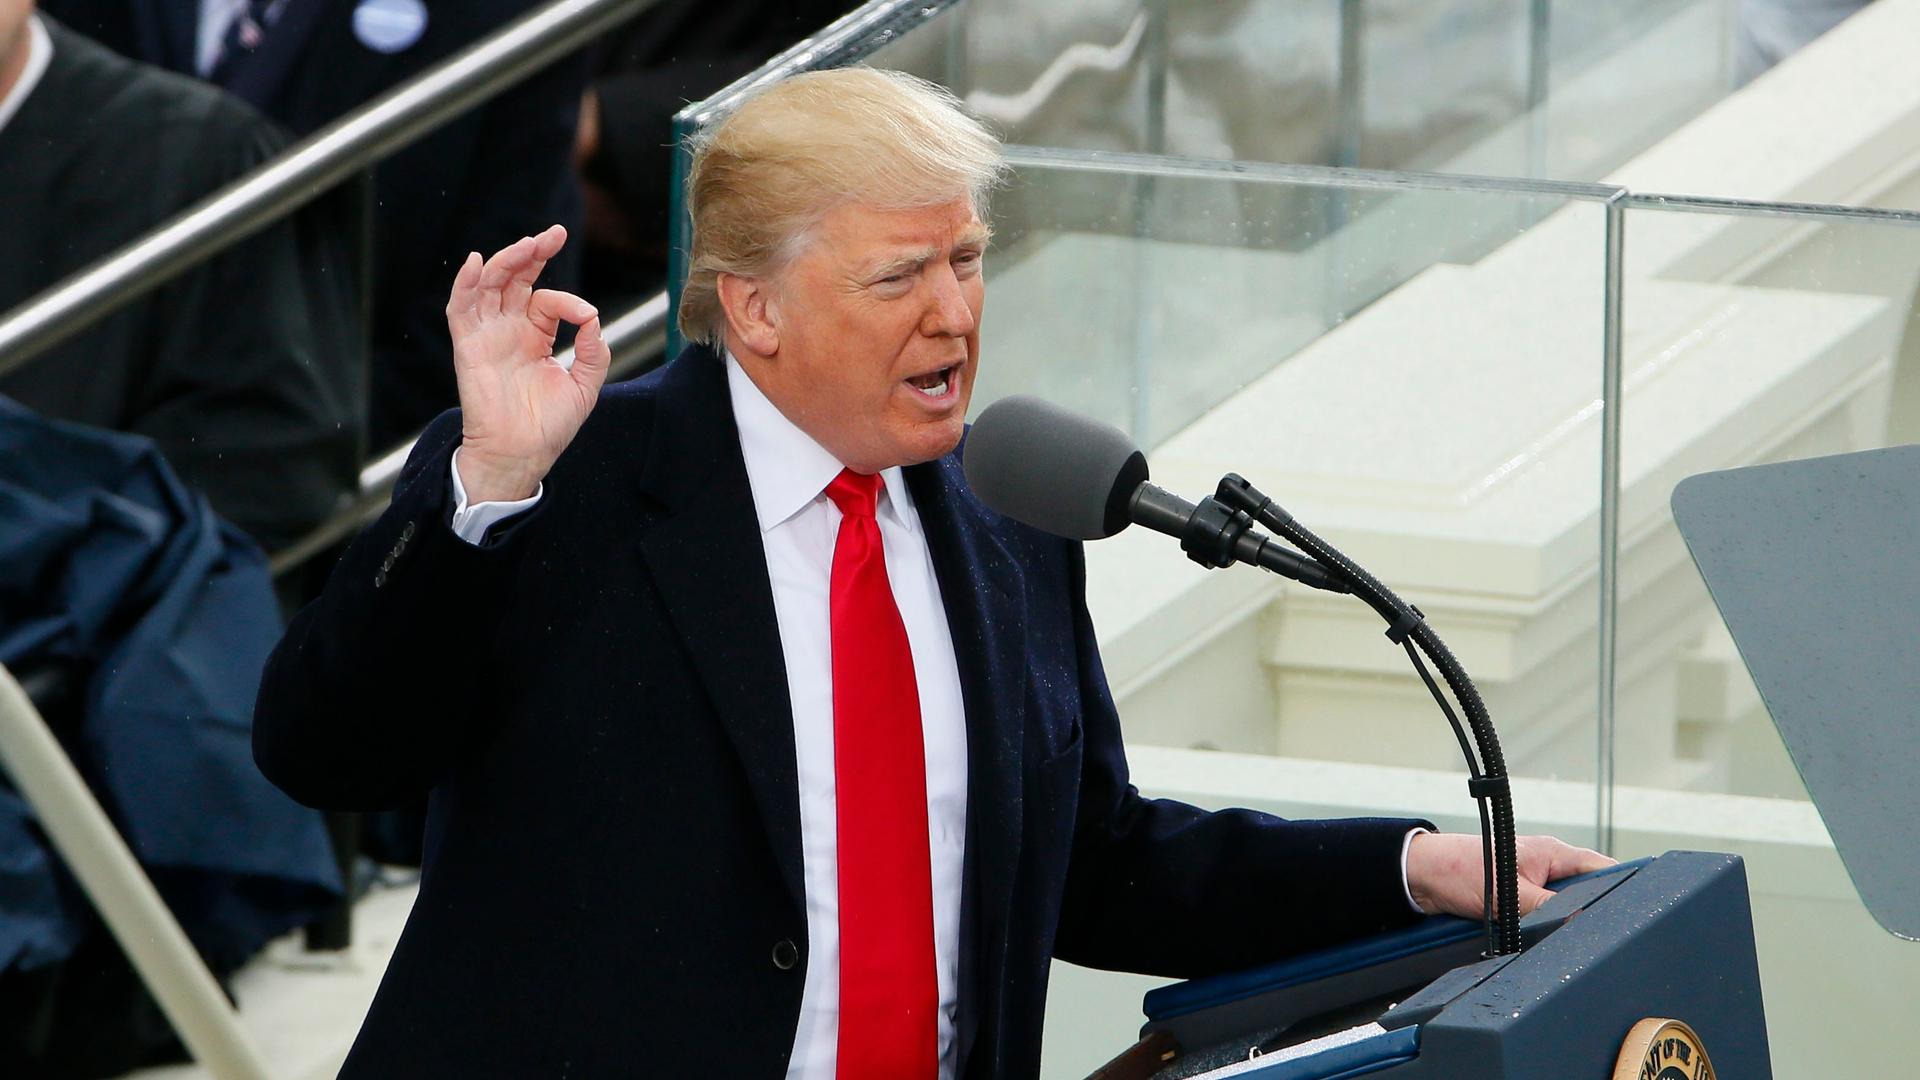 President Donald Trump delivers his speech at the inauguration ceremonies as the 45th president of the United States.